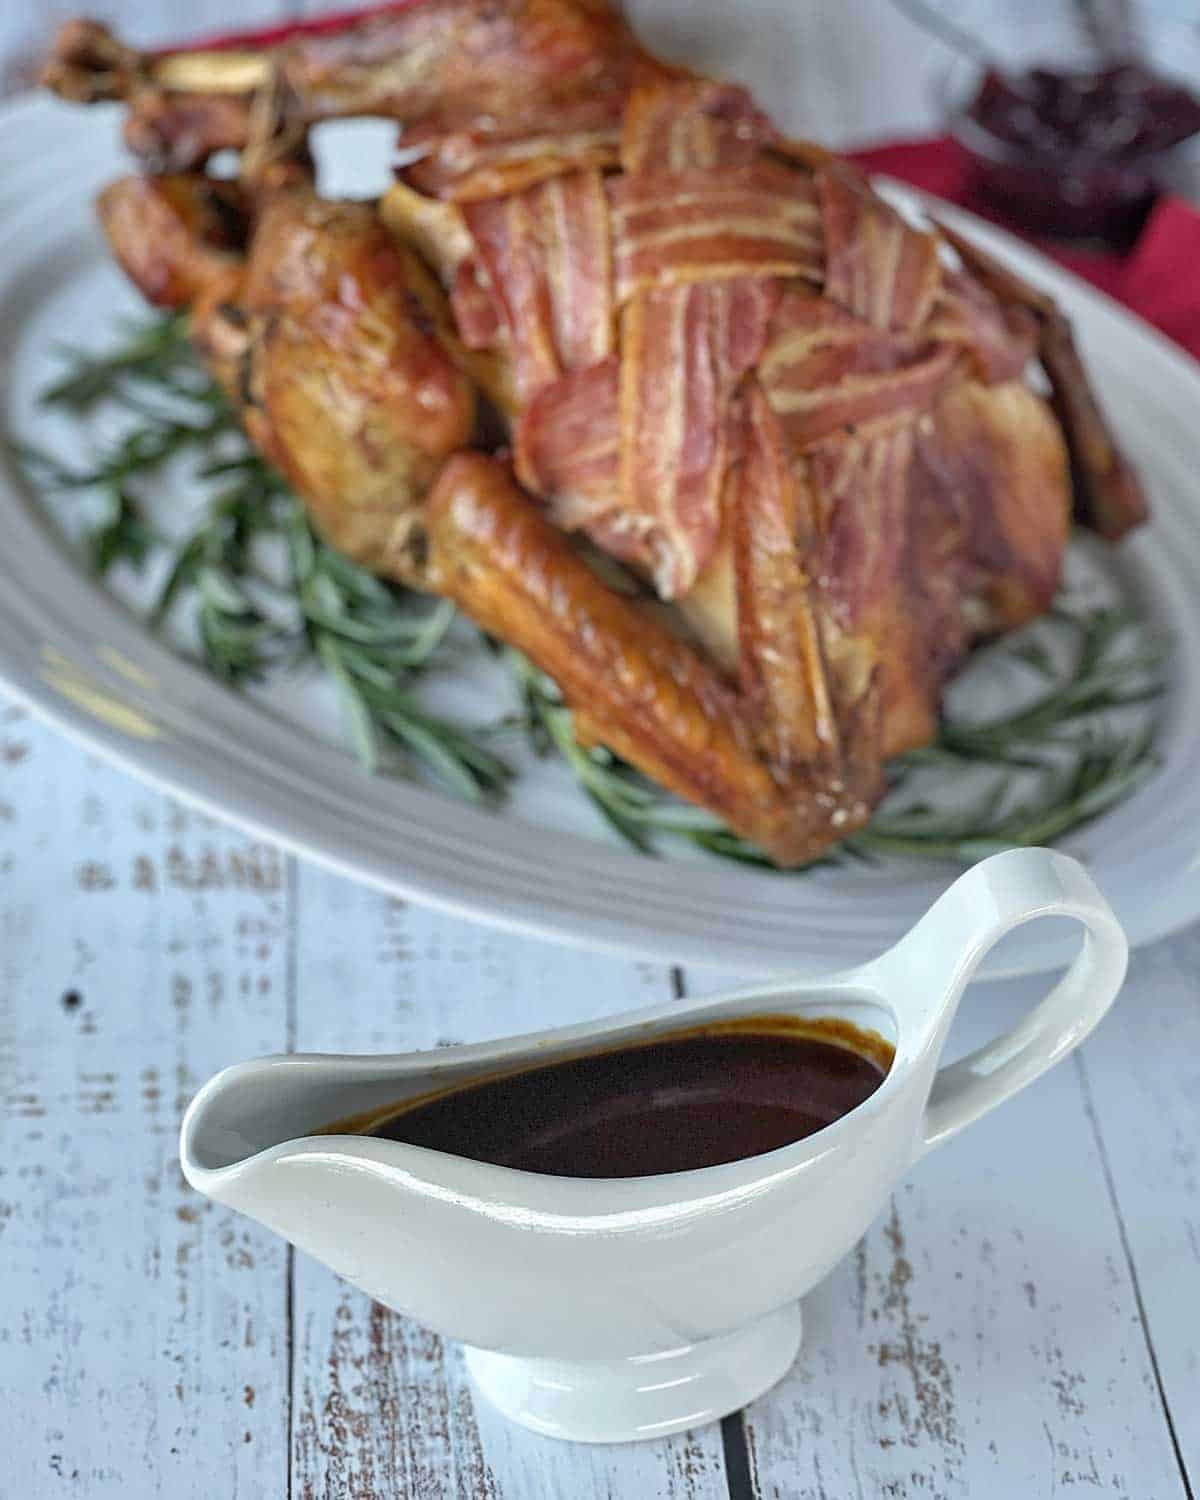 A Roast Turkey in the background and a jug of gravy in the foreground.